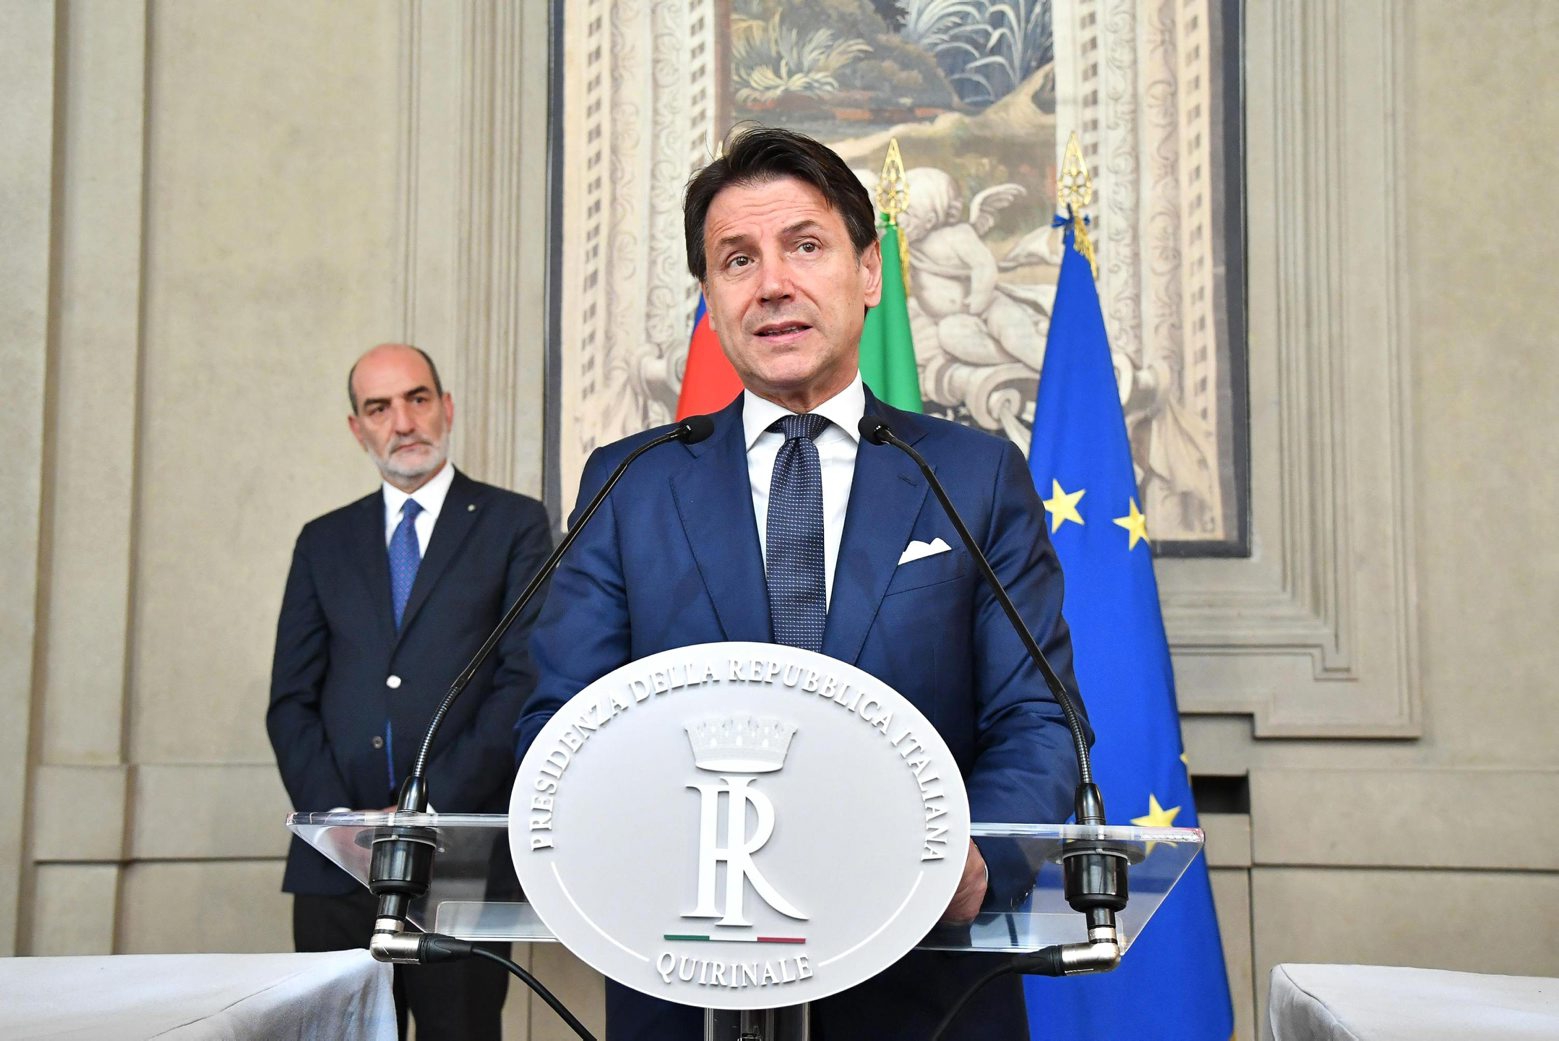 Designate premier Giuseppe Conte delivers his speech after a meeting with President Sergio Mattarella at Rome's Quirinale presidential palace, Thursday, Aug. 29, 2019. Italy's president has given the recently resigned premier, Giuseppe Conte, a fresh mandate to see if he can cobble together a new government backed by the populist 5-Star Movement and center-left Democrats. (Alessandro Di Met/ANSA via AP) Italy Politics